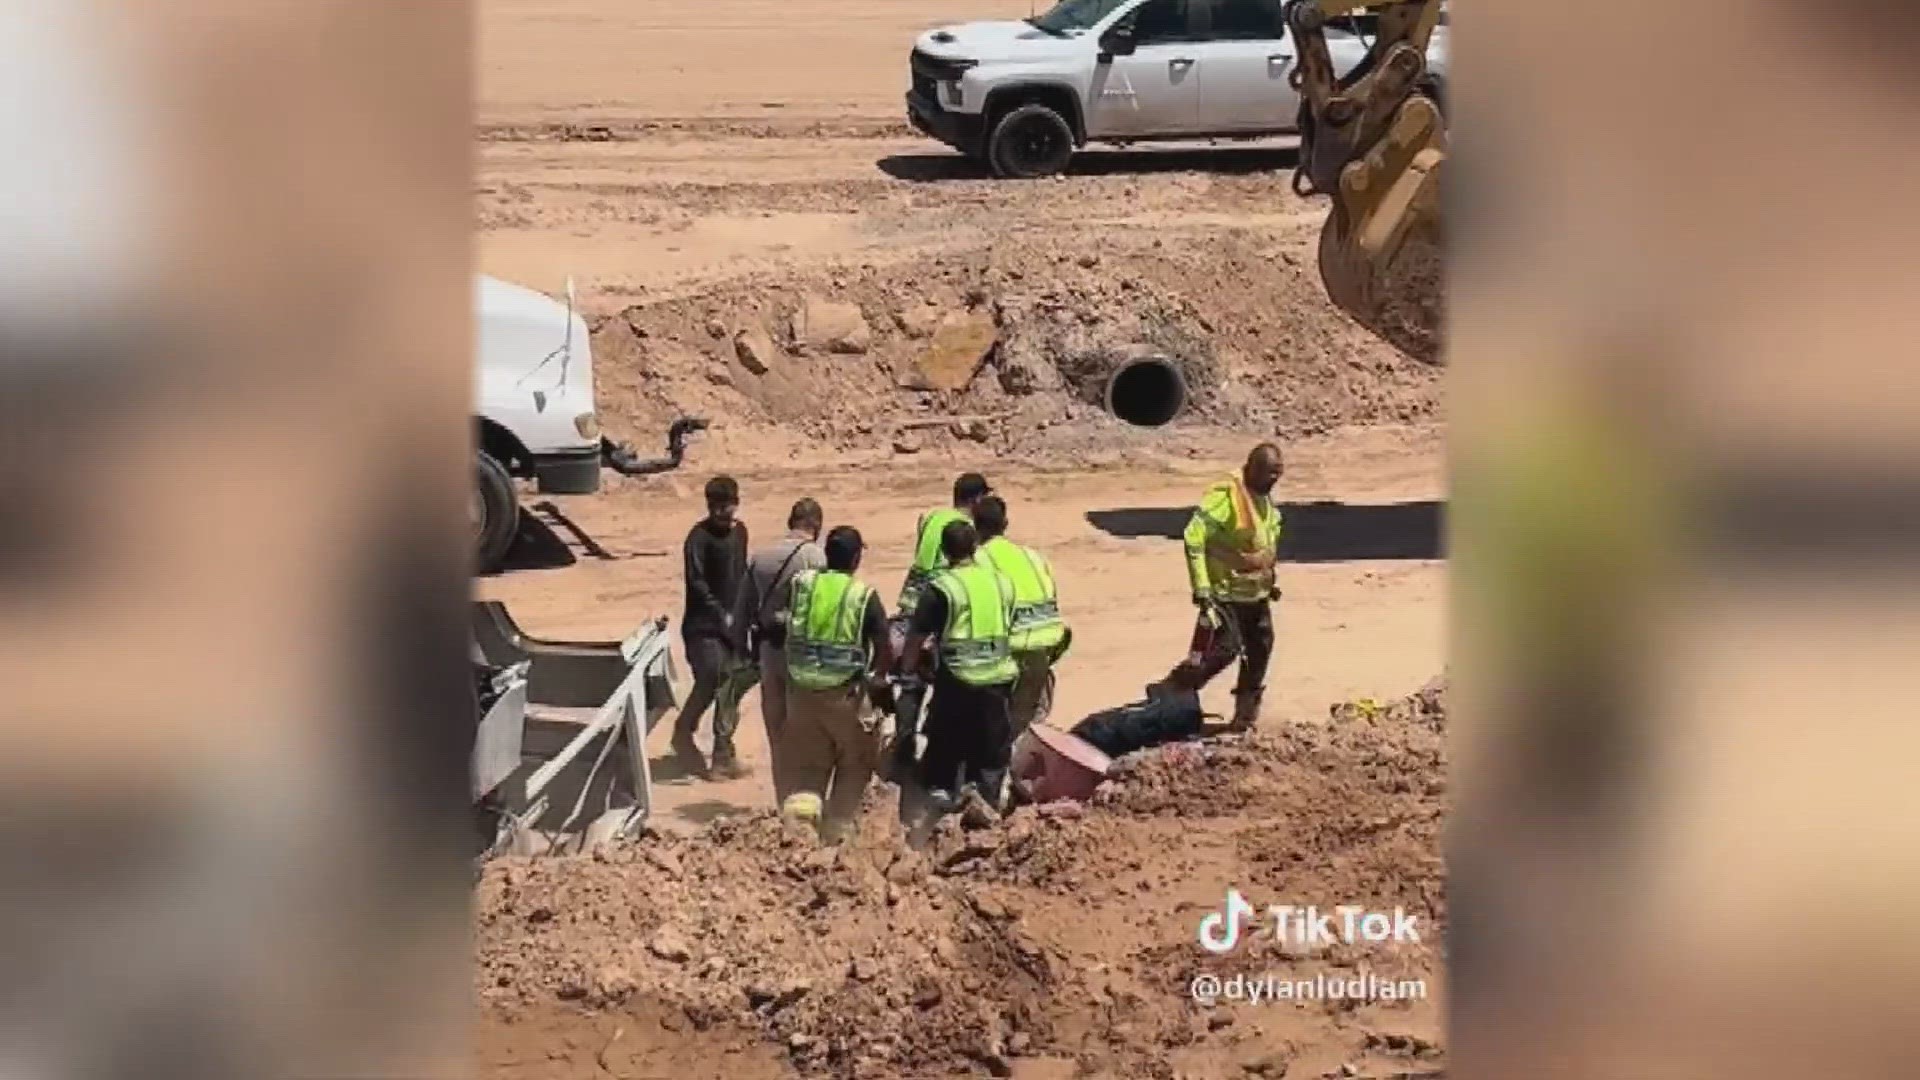 Valley Construction Workers Rescue Truck Driver After Crash